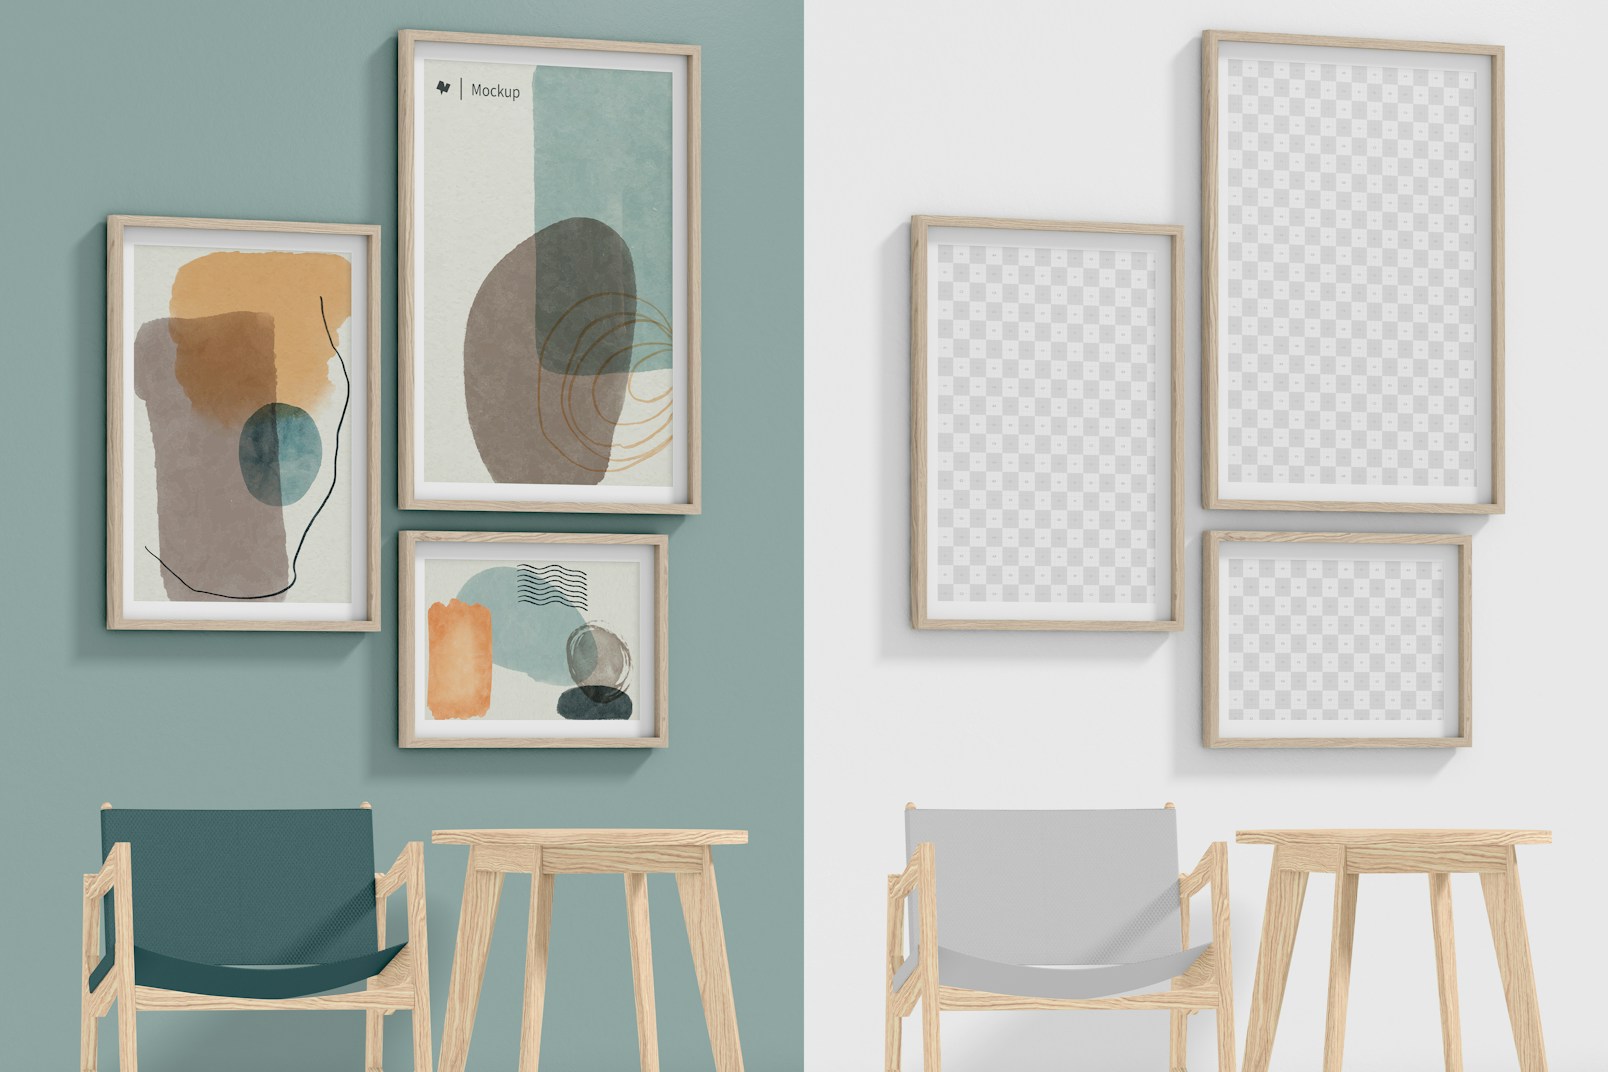 3 Gallery Frames with Rocking Chair Mockup, Perspective